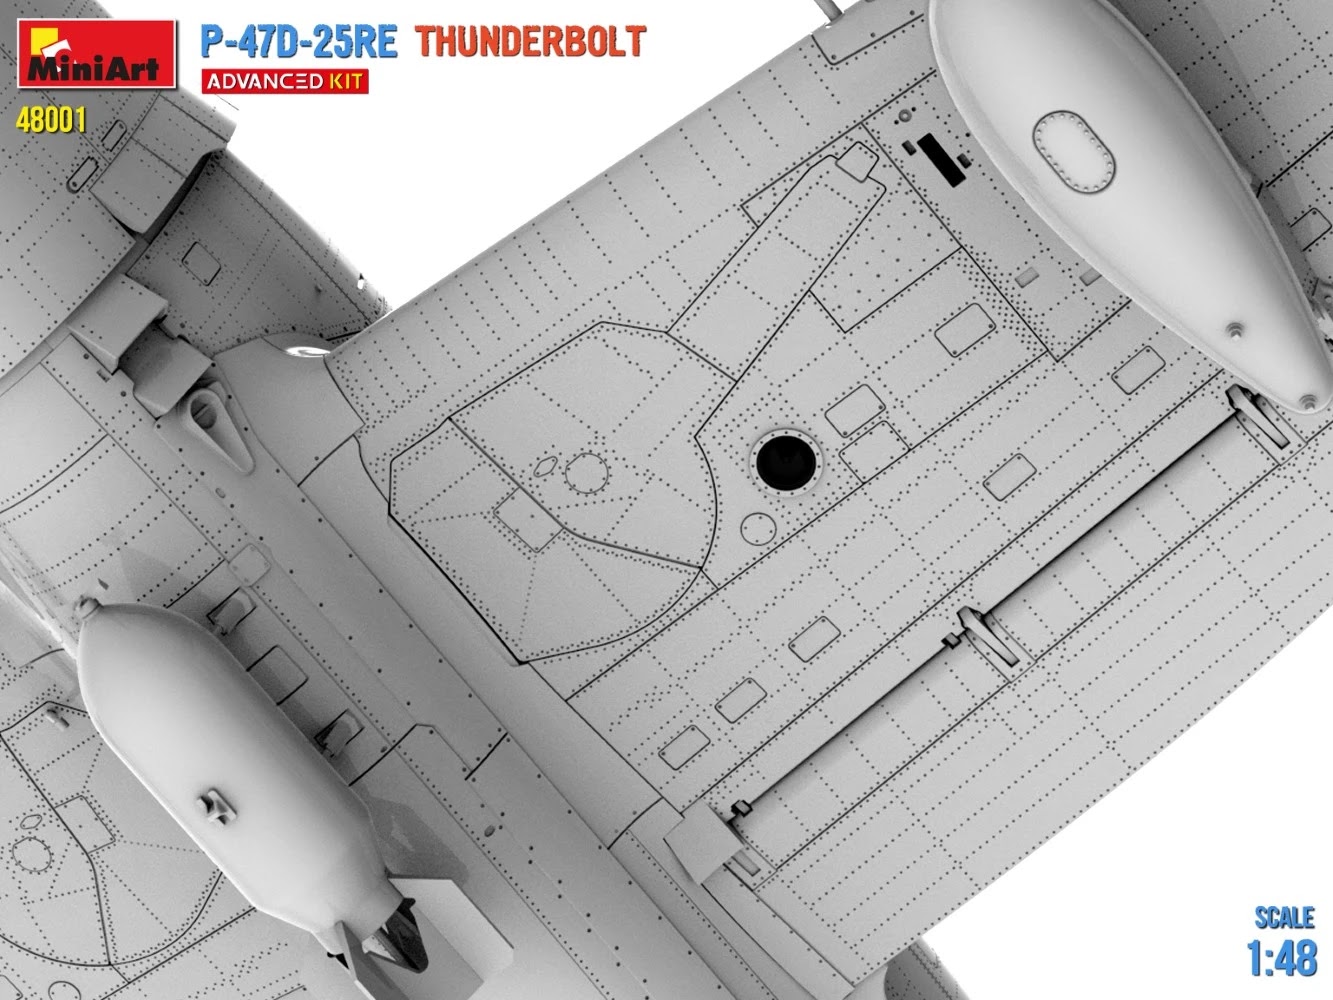 MiniArt ups the detail on their P-47D CAD Wings Detail